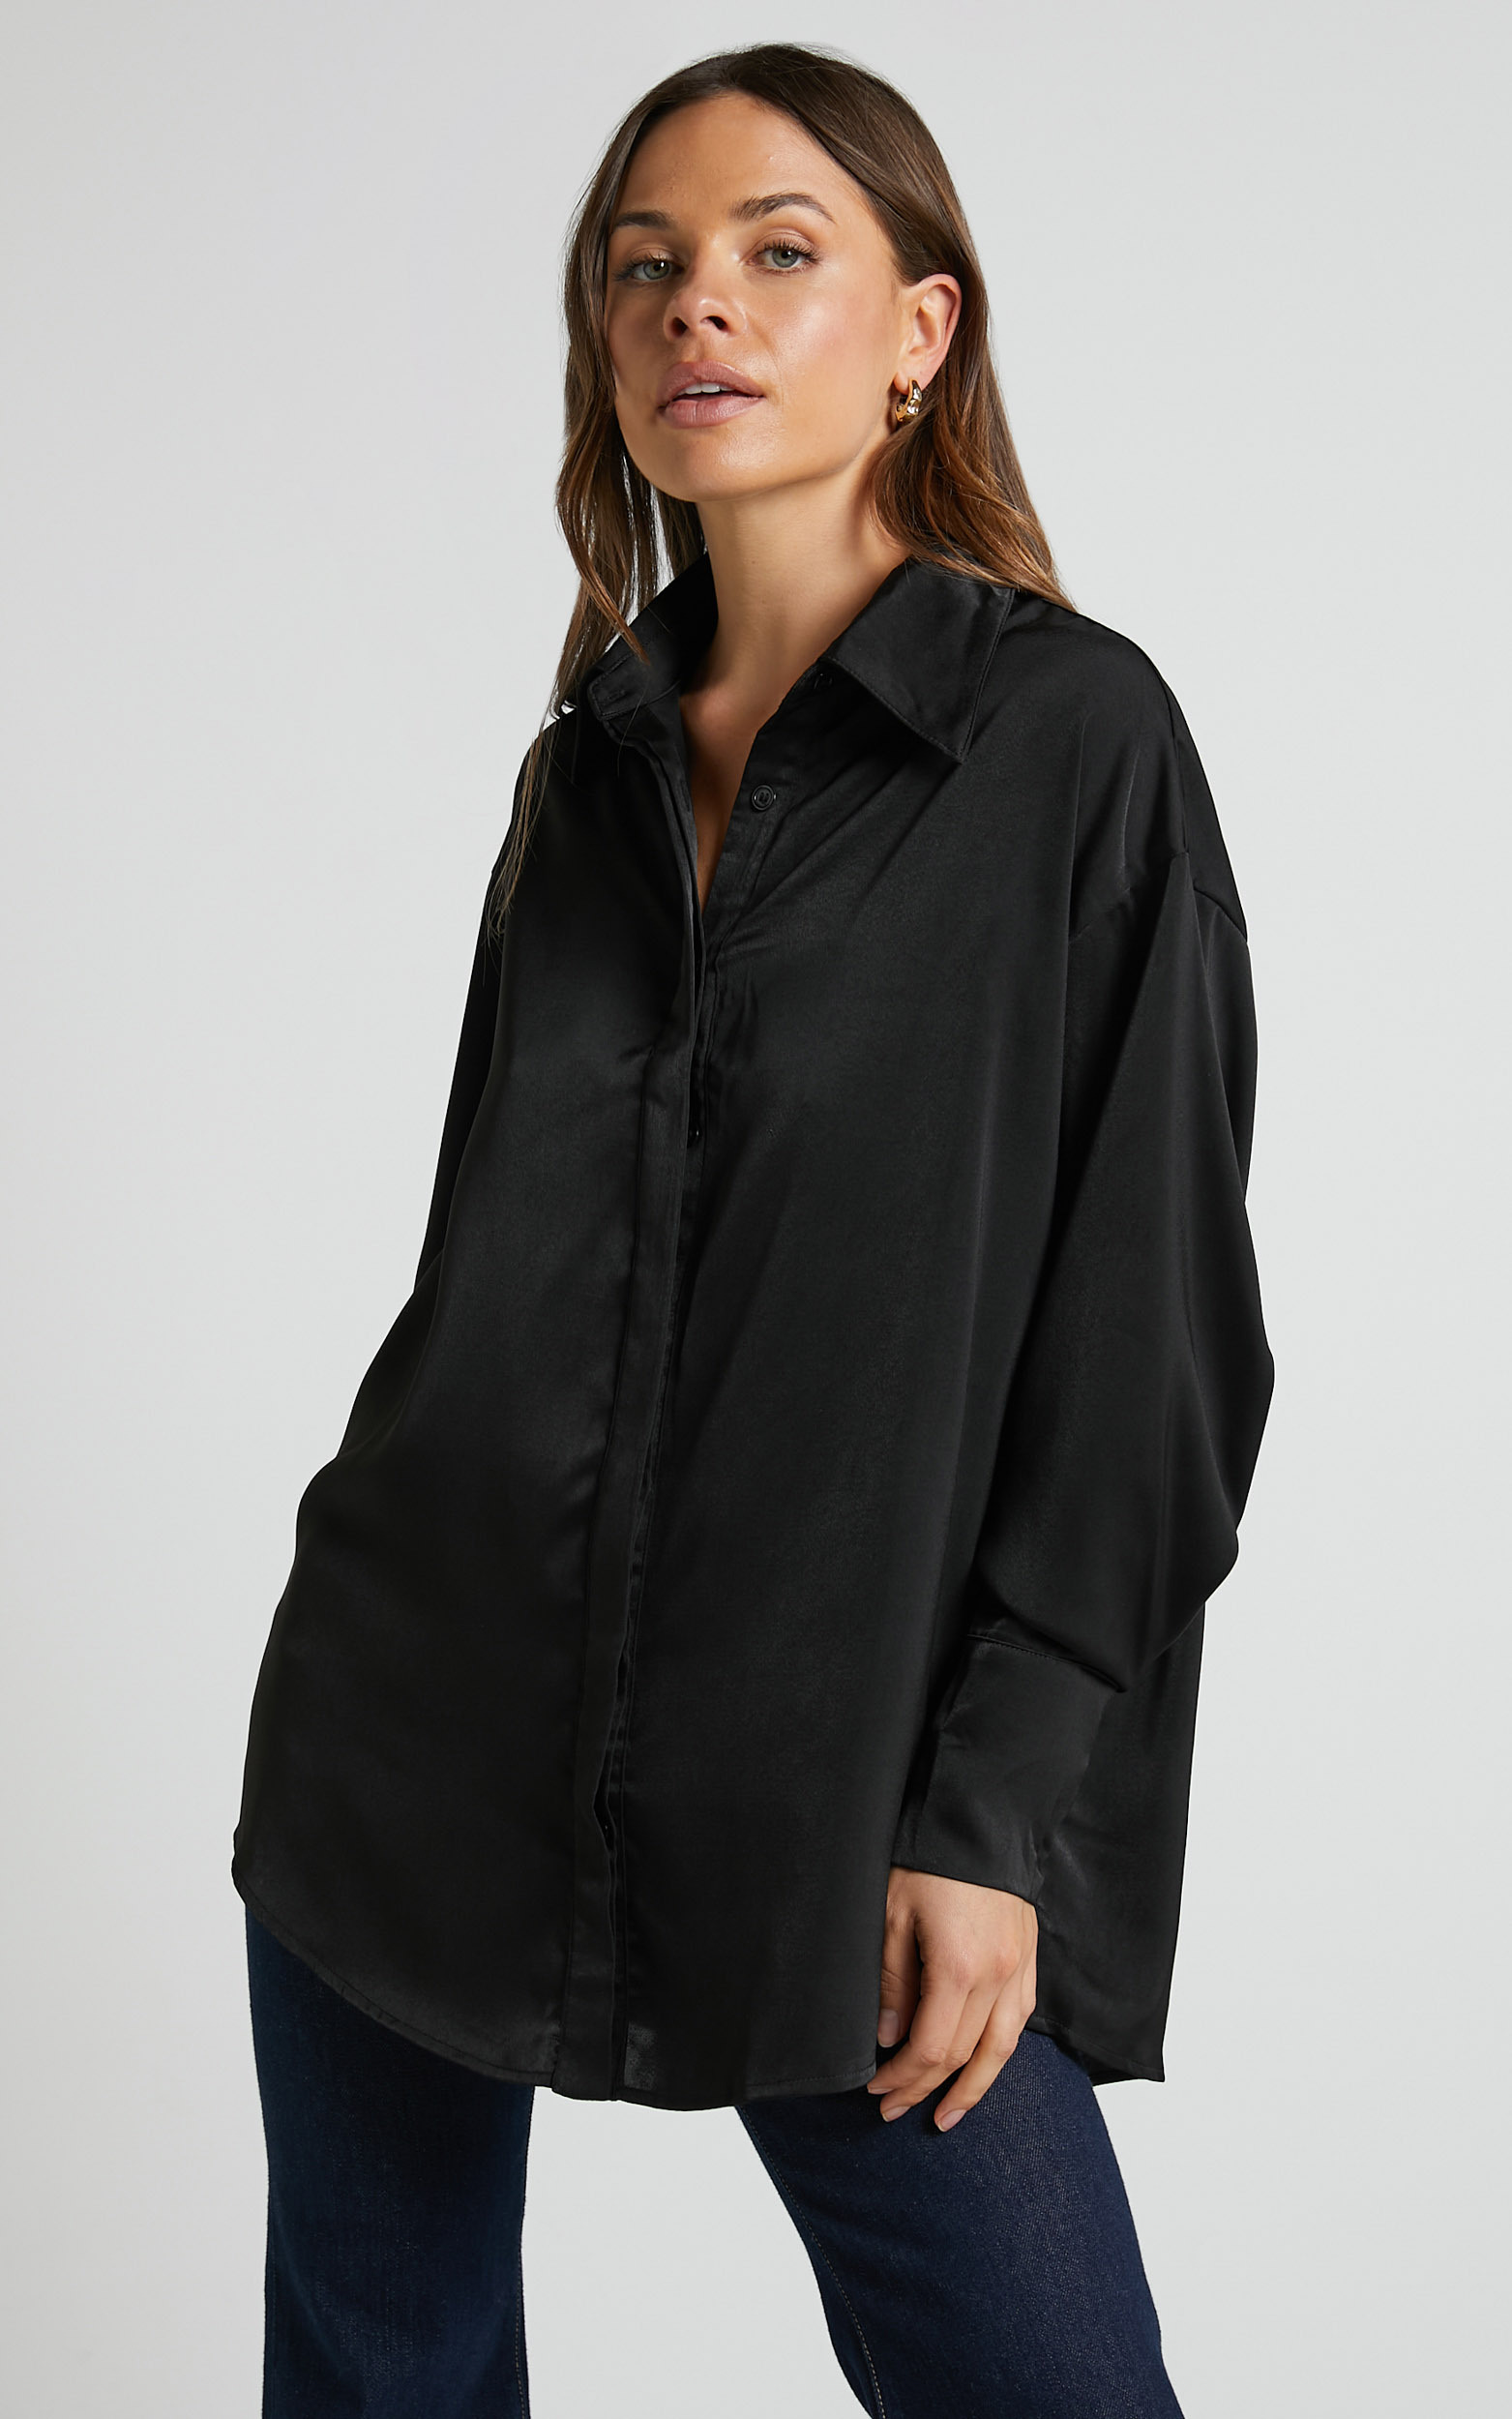 Azurine Oversized Button Up Satin Shirt in Black - 06, BLK2, hi-res image number null